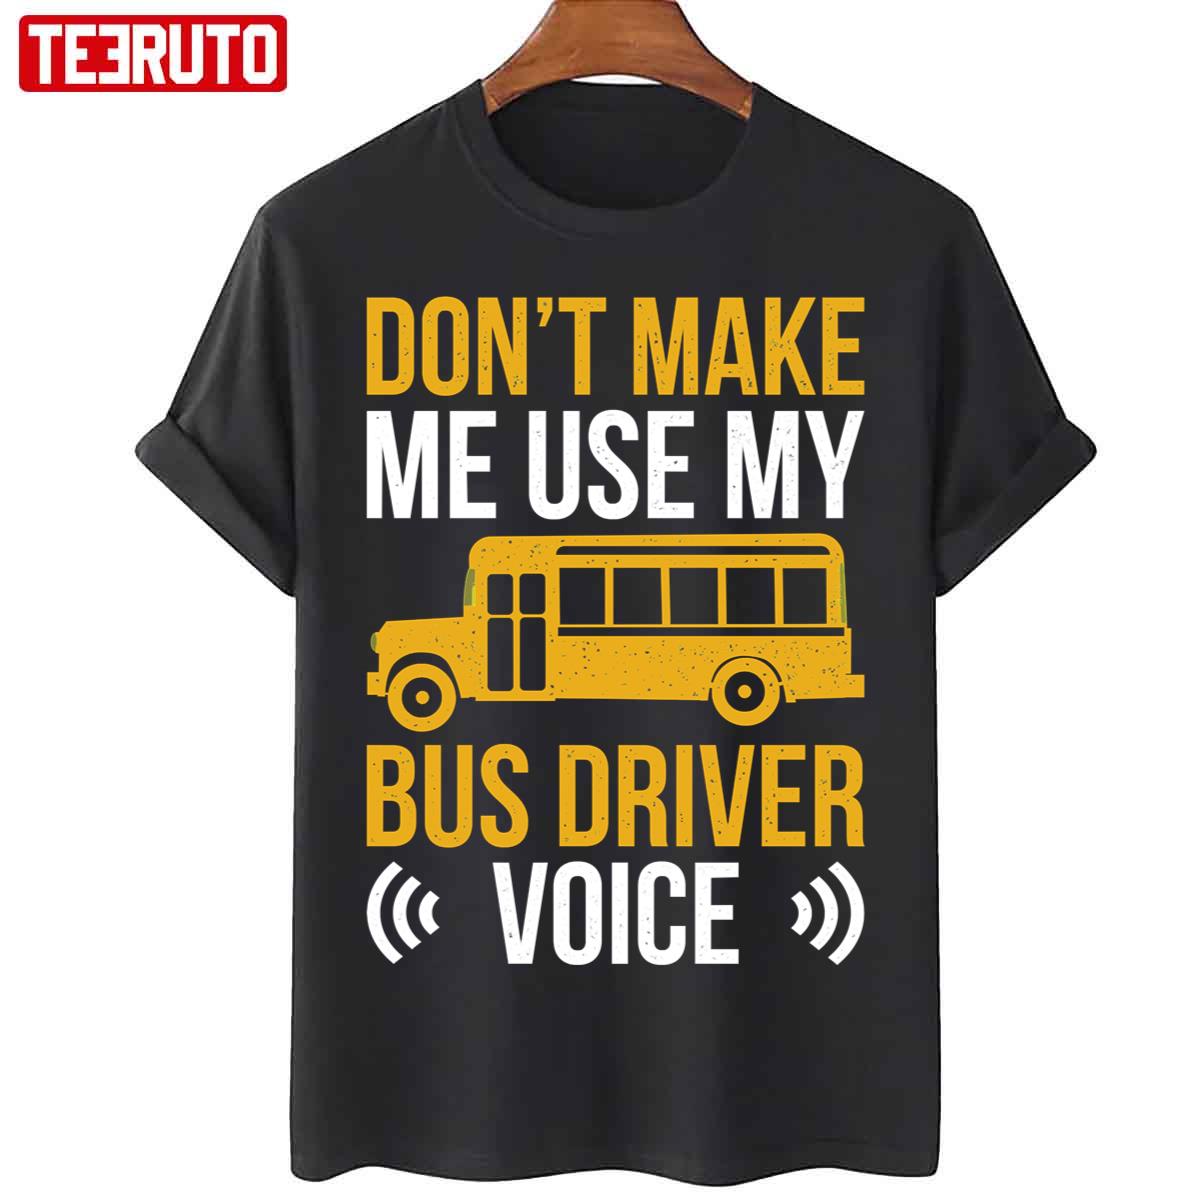 Humor Bus Driver Driving Quote Don’t Make Me Use Bus Driver Voice Unisex T-Shirt